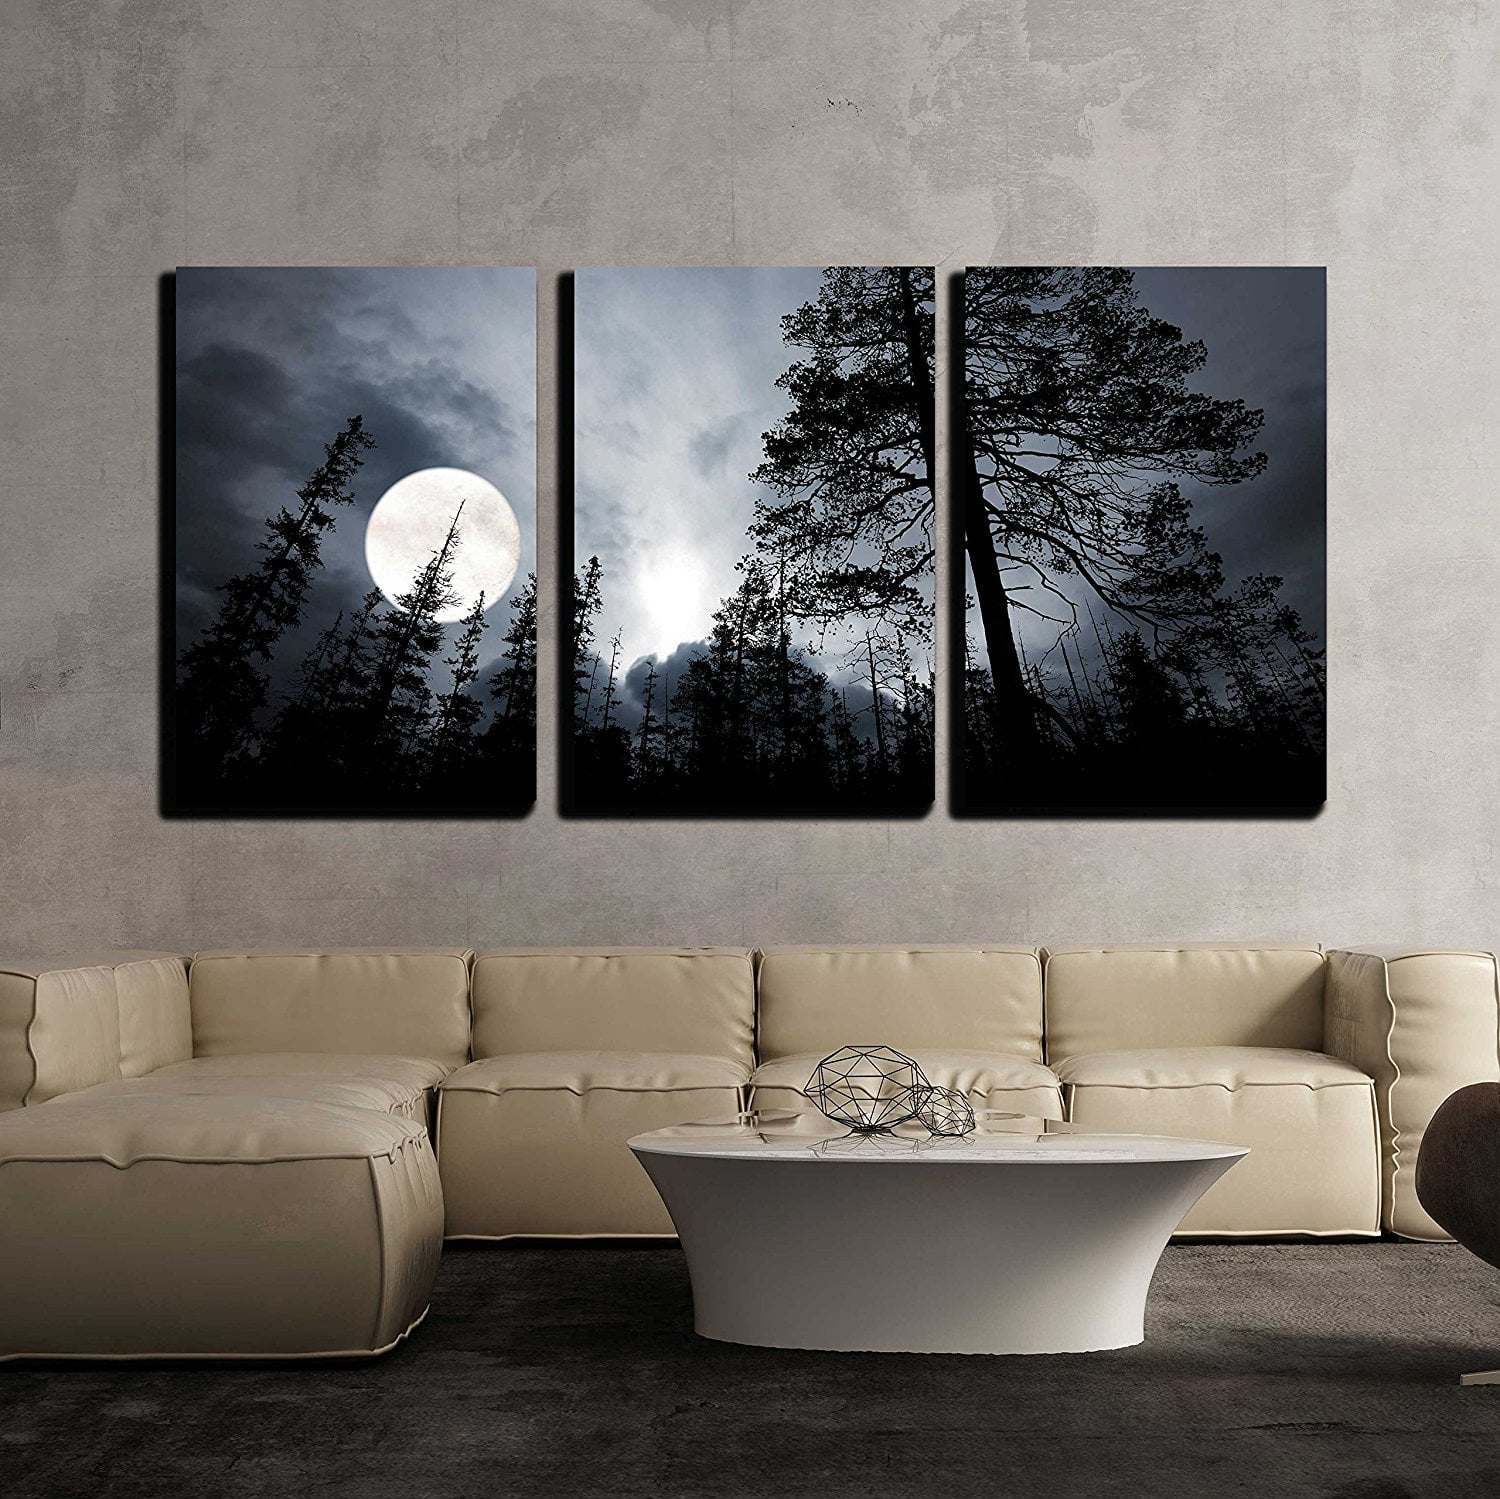 Sci Fi Dark Boat Balloons Oil Painting Printed On Canvas Home Art Wall Decor 